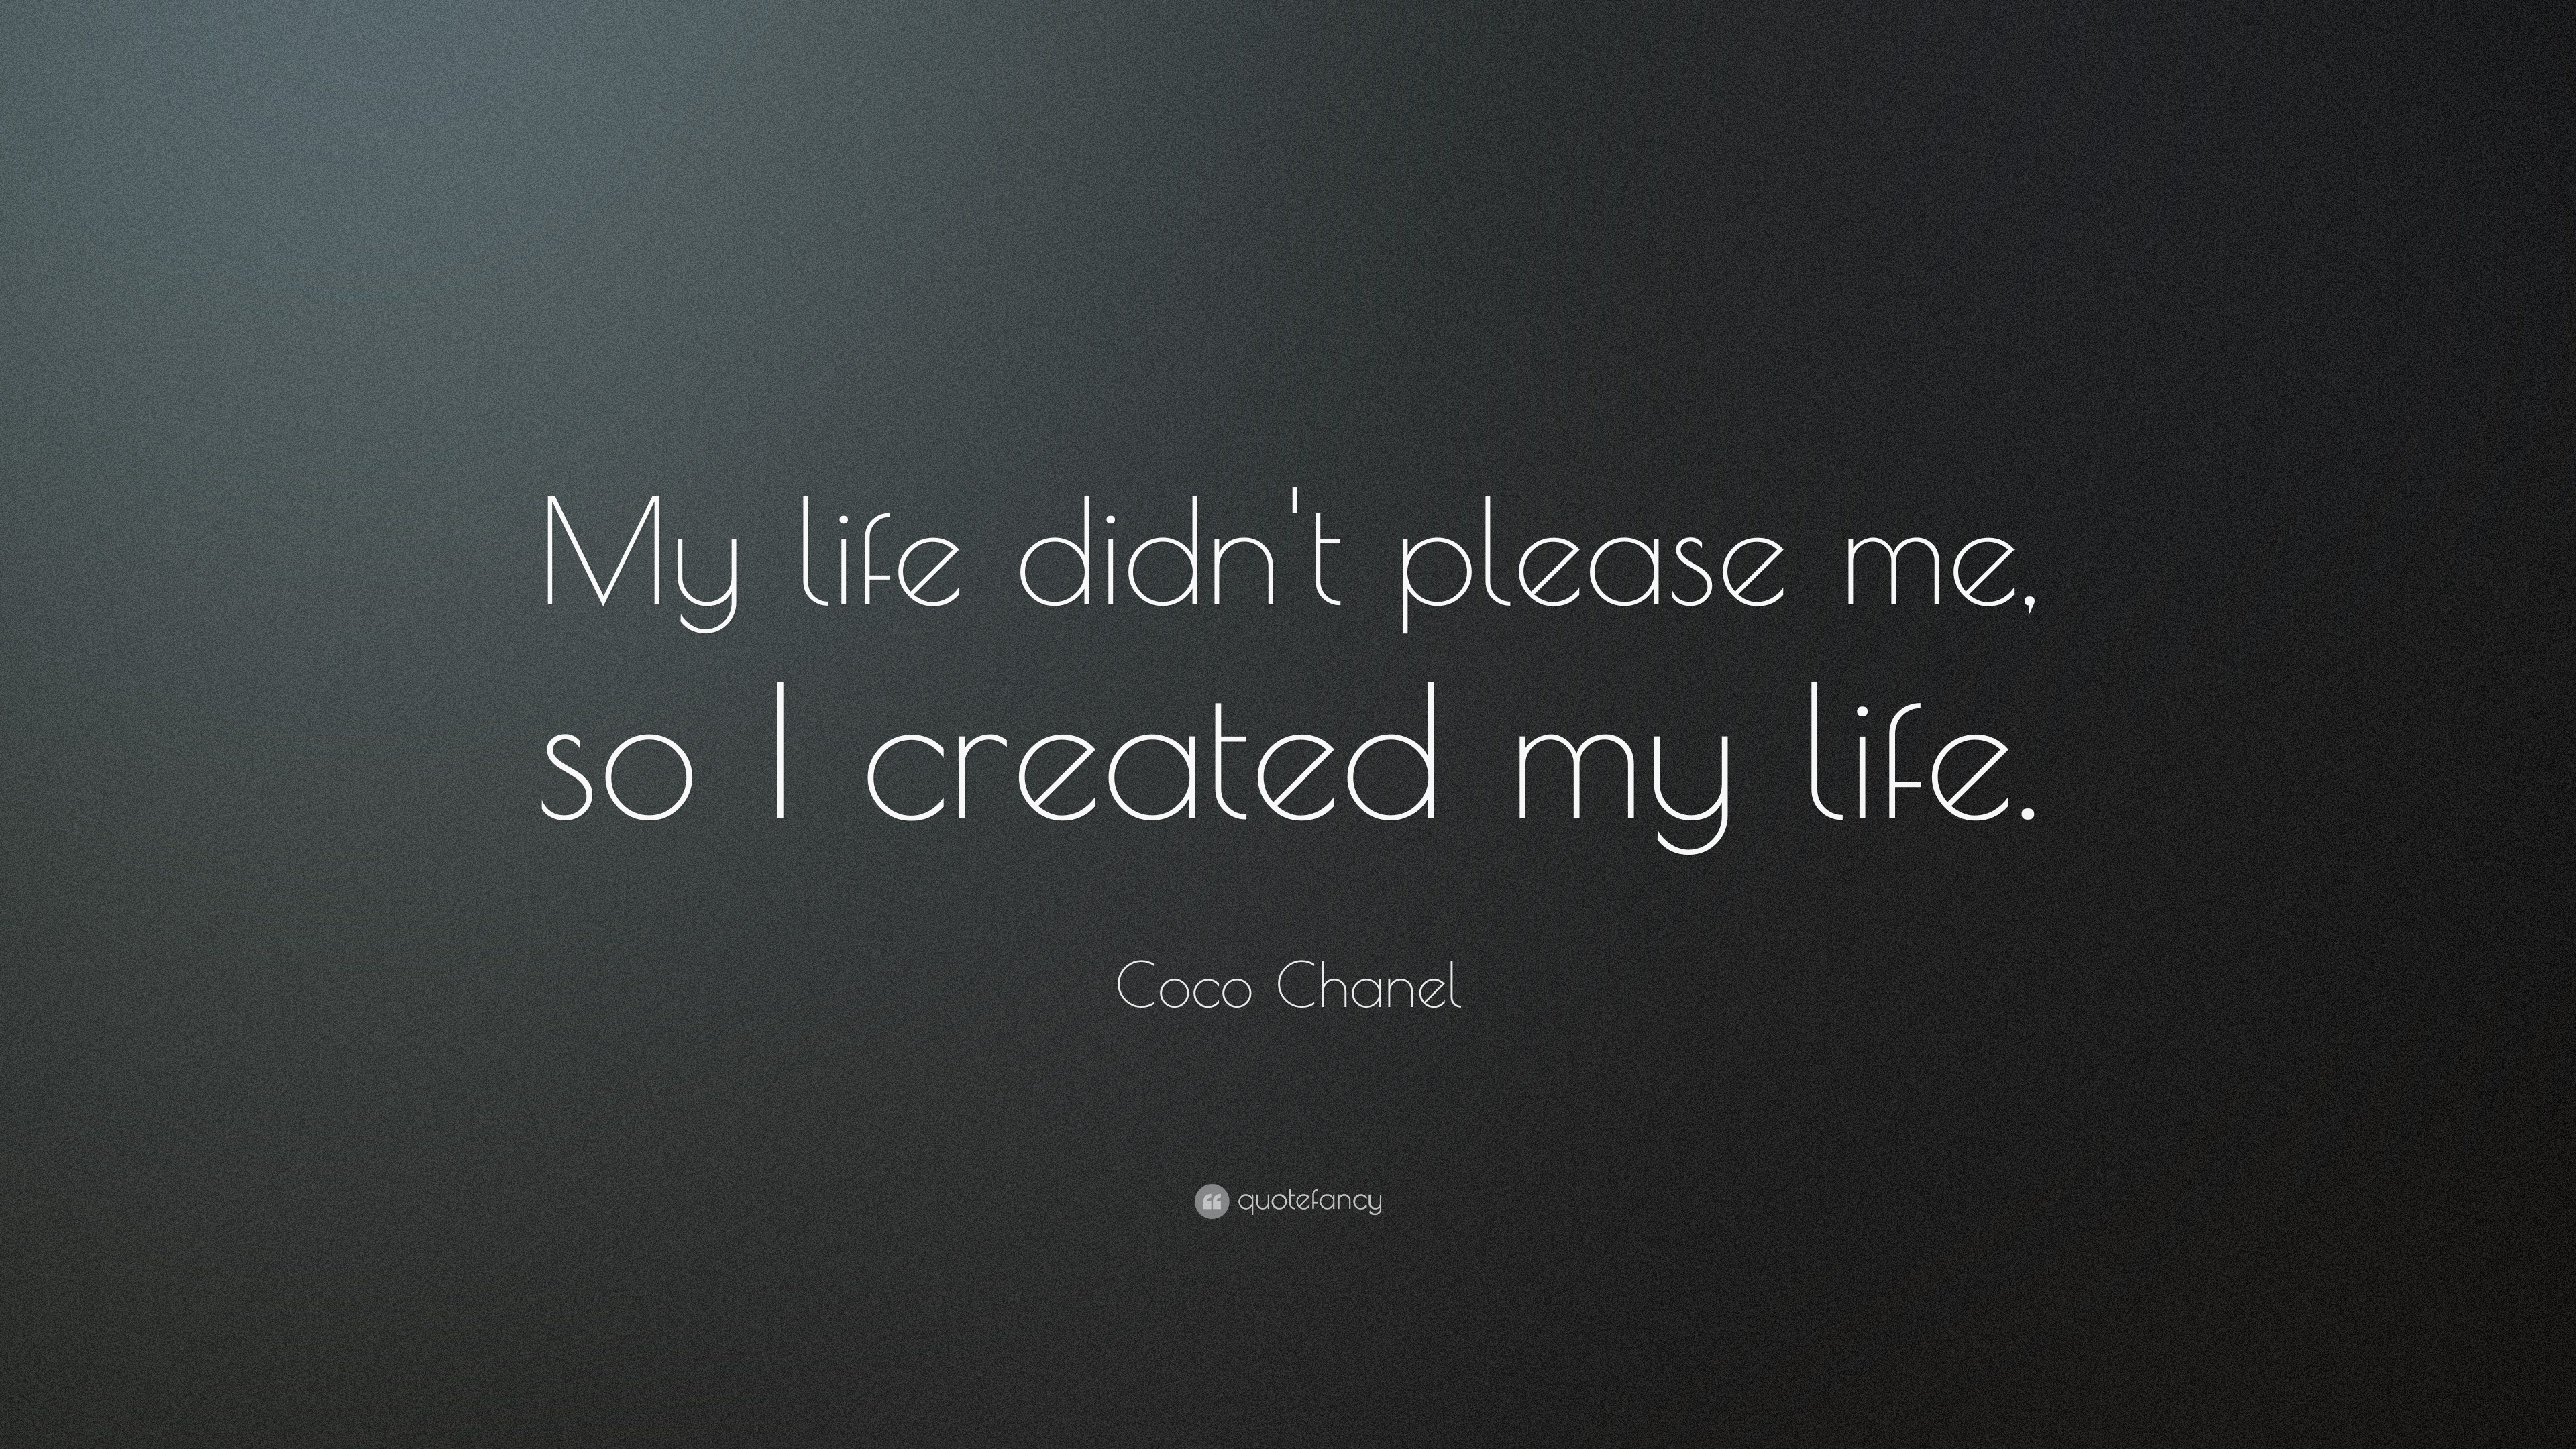 Coco Chanel Quotes 22 wallpapers - Quotefancy